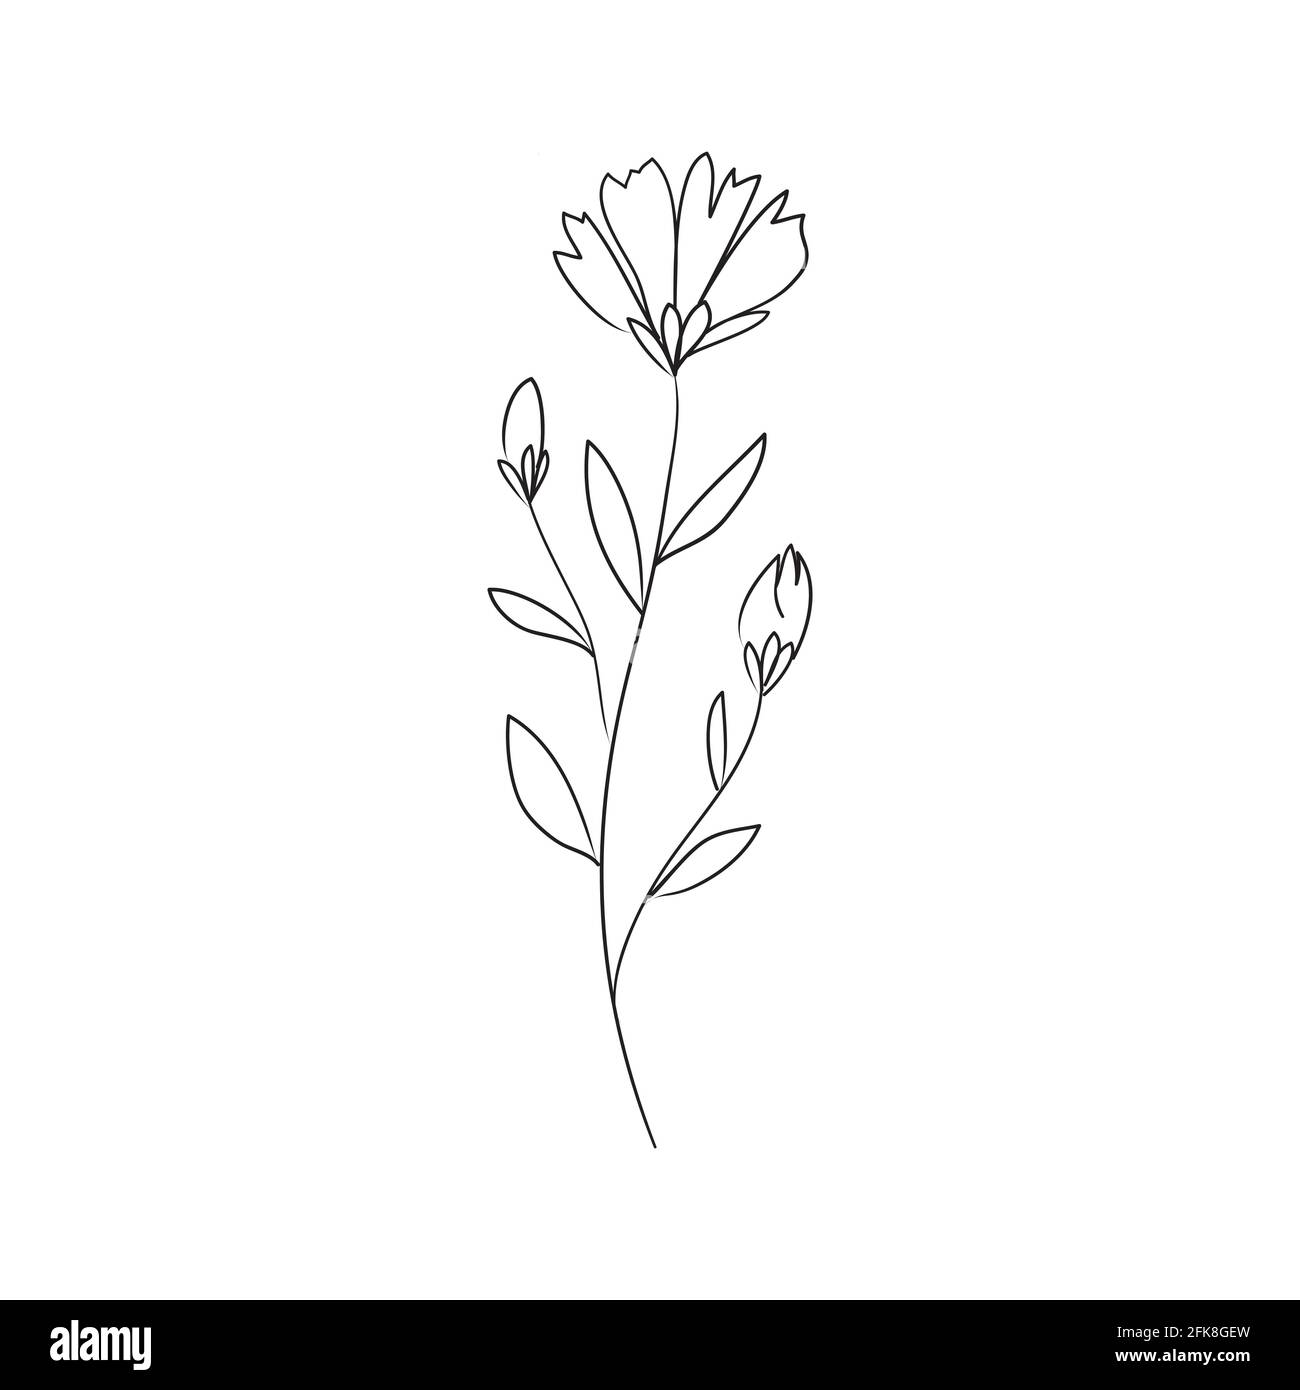 Sketch a leaf branch by hand on an isolated background. Vector, illustration Stock Vector